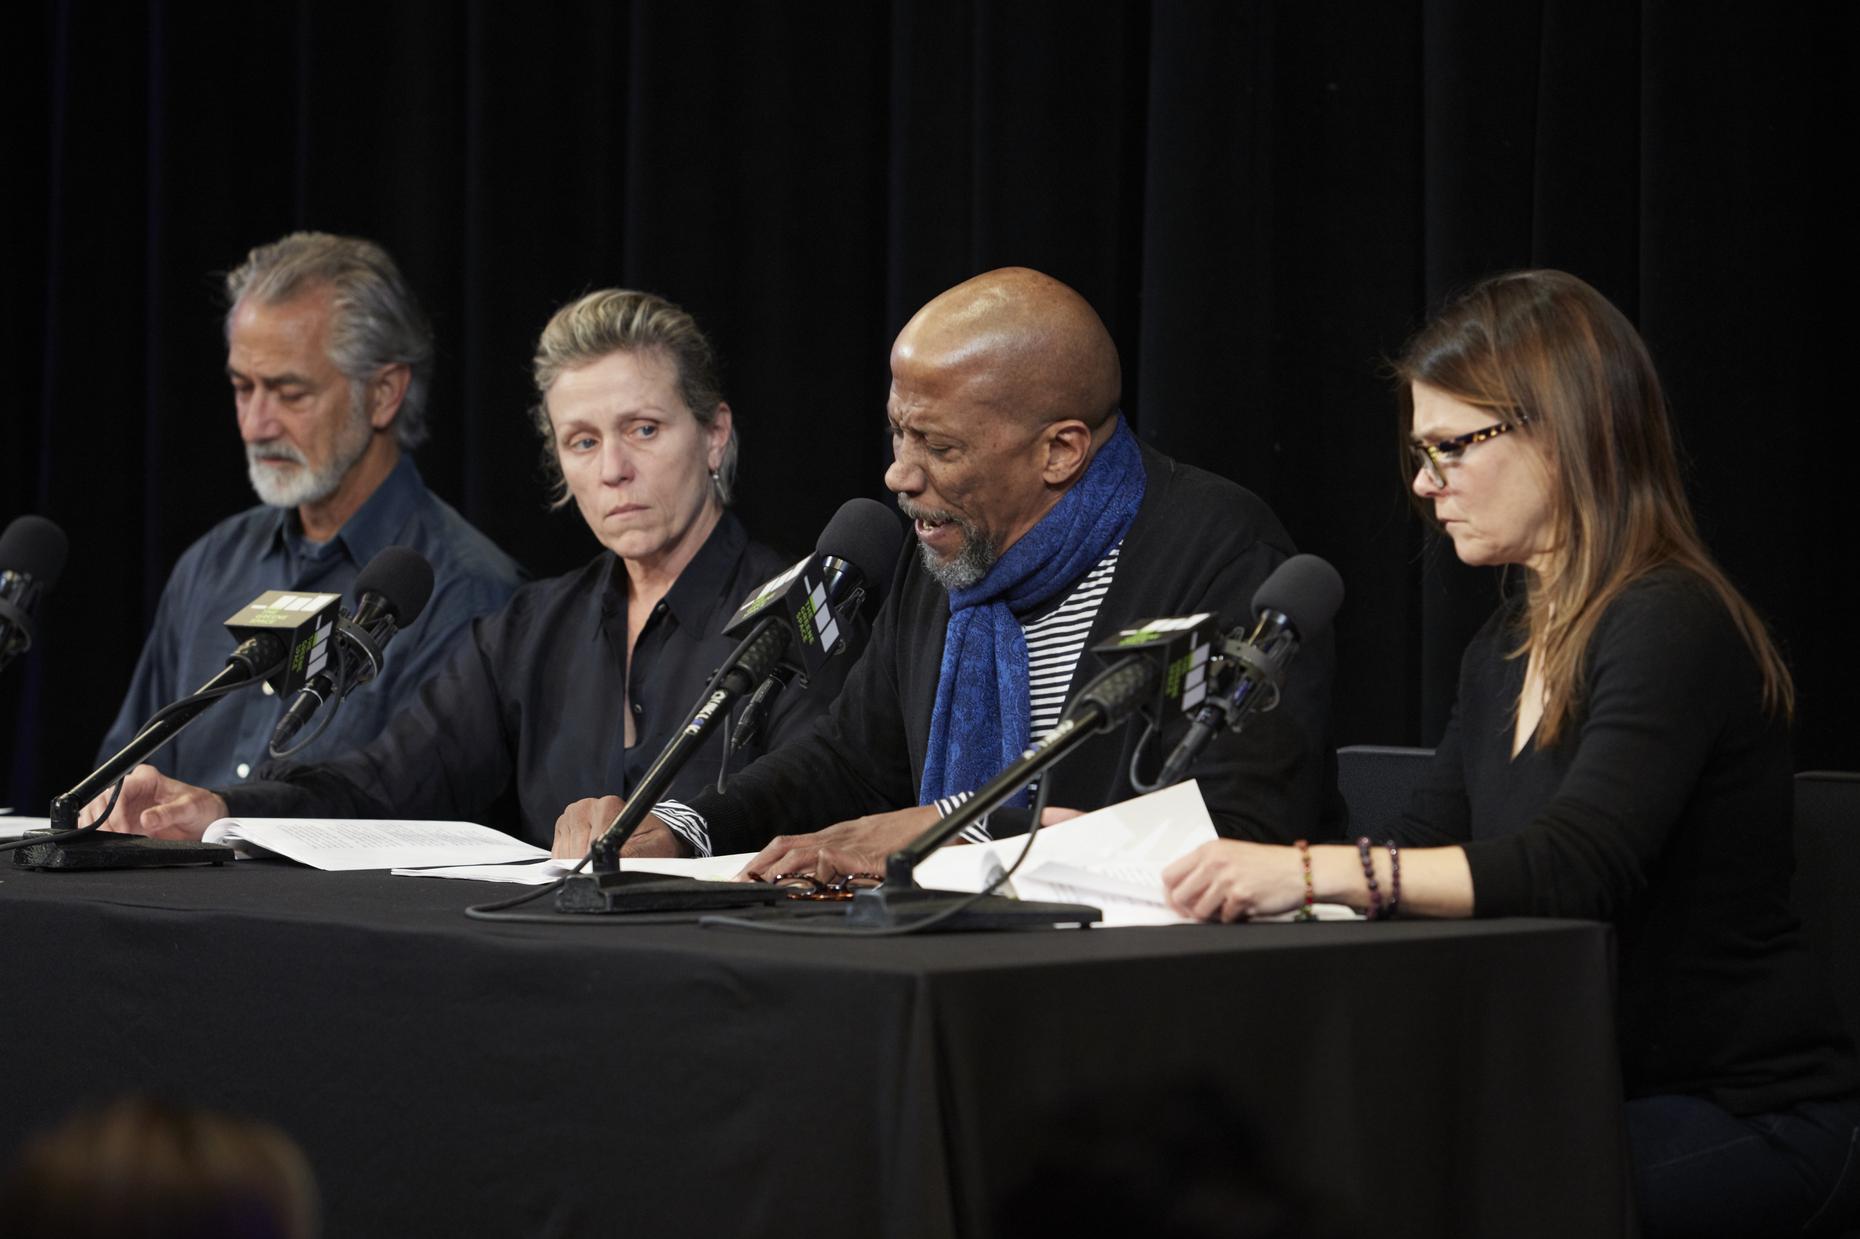 ‘Theater of War’ with Frances McDormand, David Strathairn, Reg E. Cathey and Kathryn Erbe